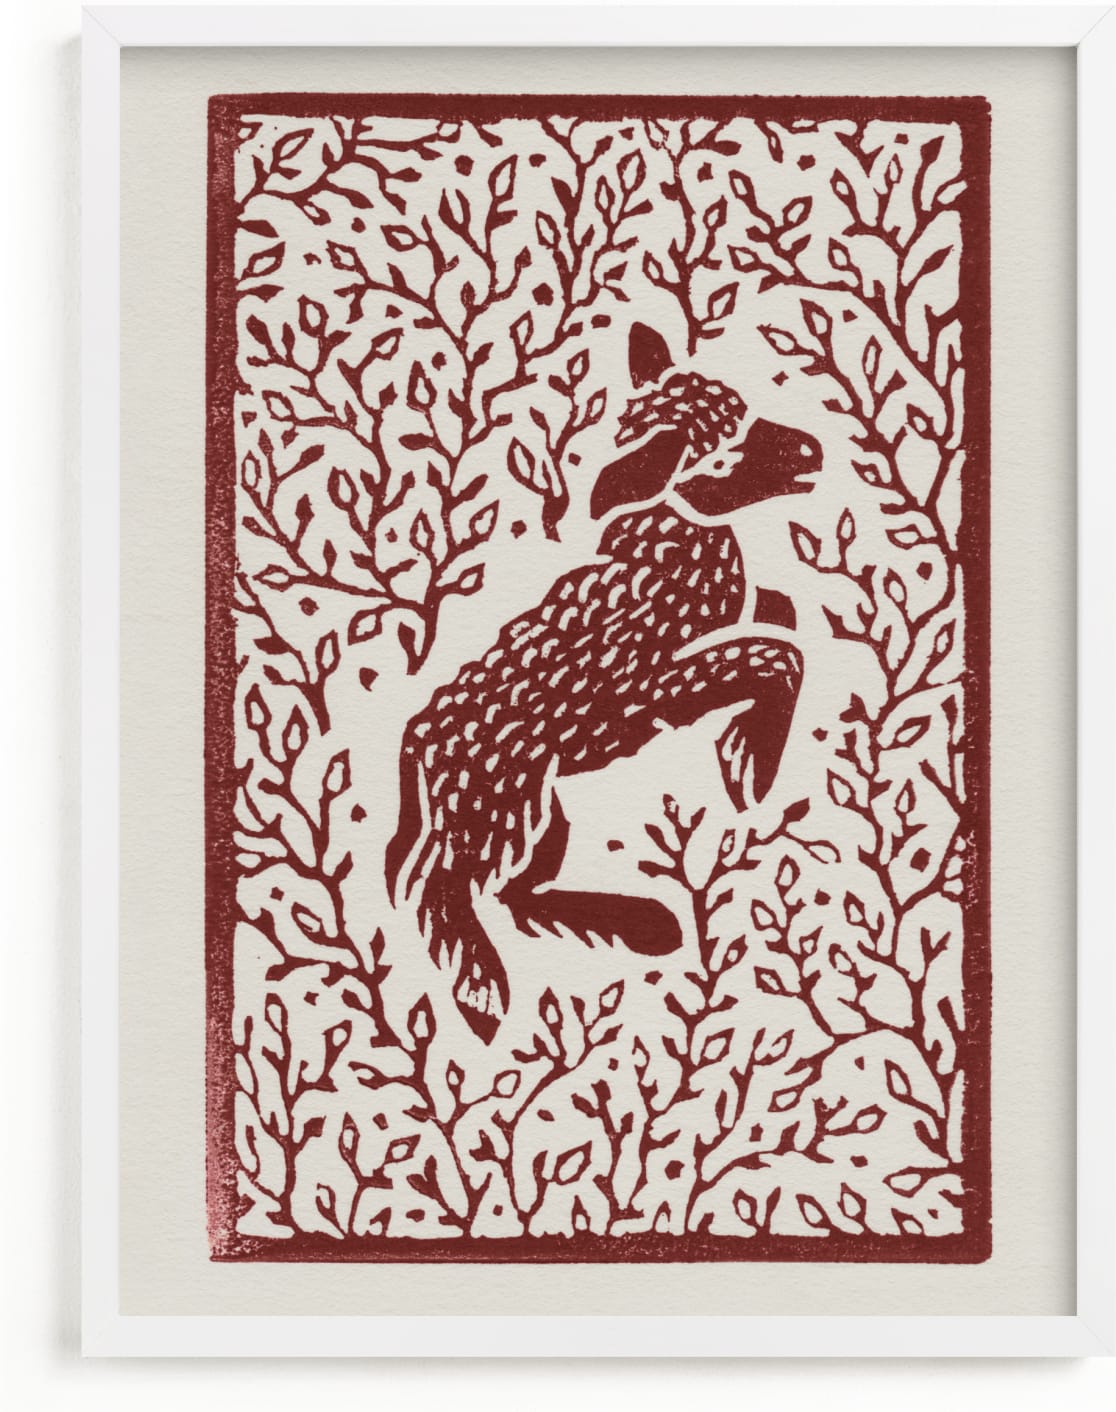 This is a ivory art by Ash Weaver called Lamb Linocut.